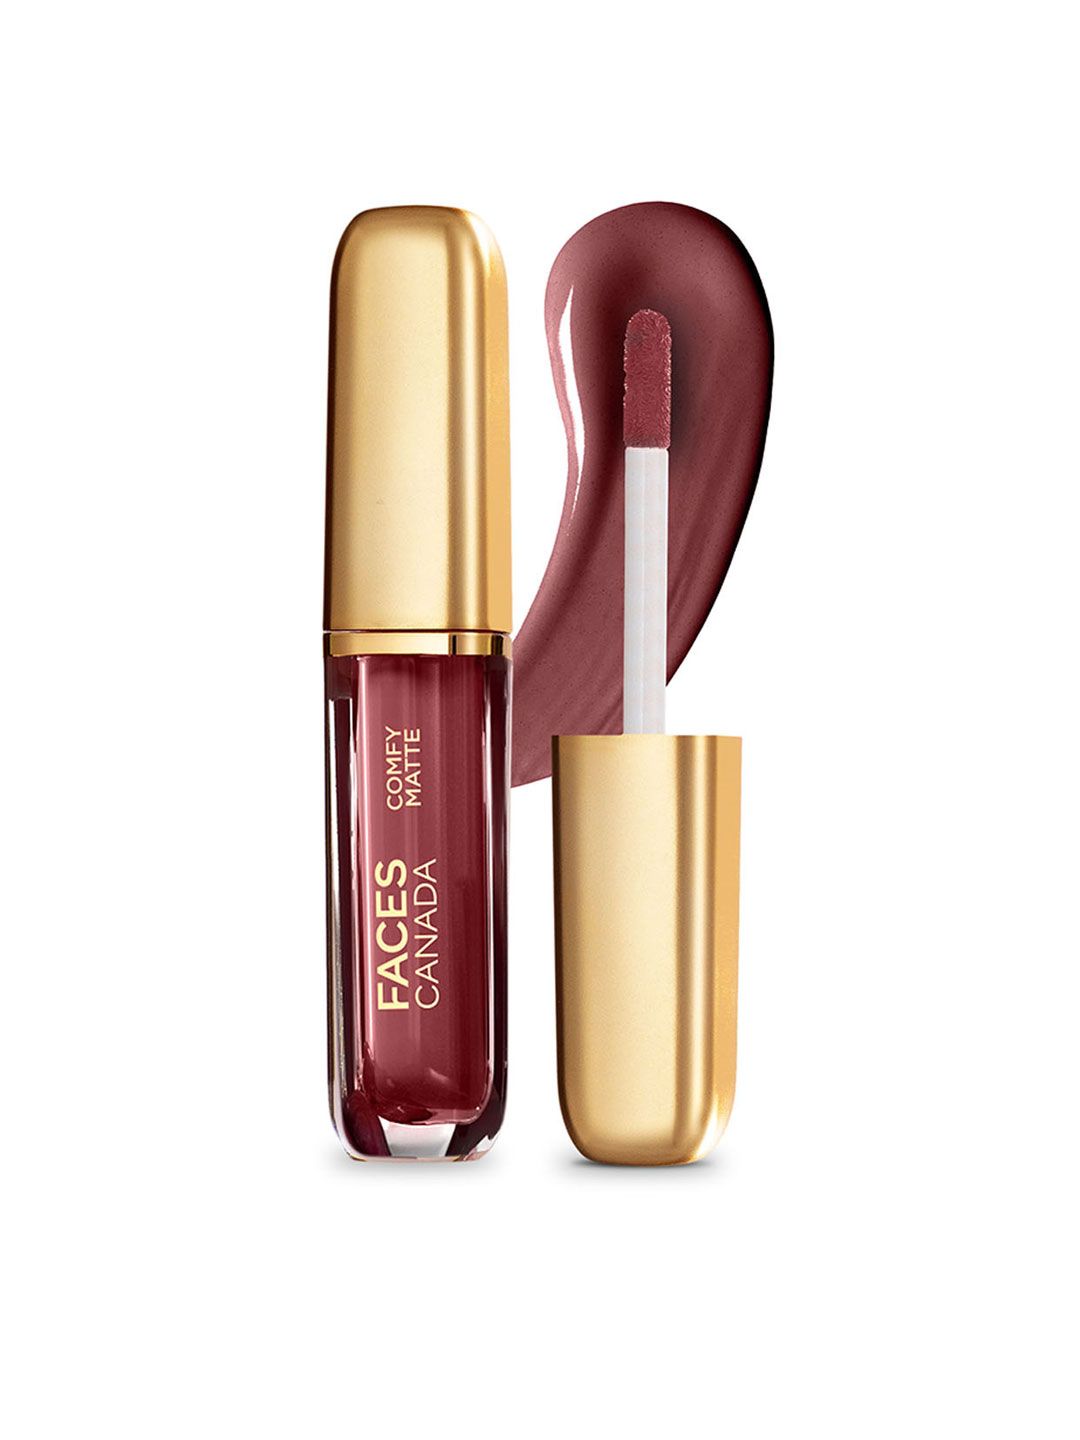 FACES CANADA Comfy Matte Lip Color 3 ml - Note To Self 07 Price in India